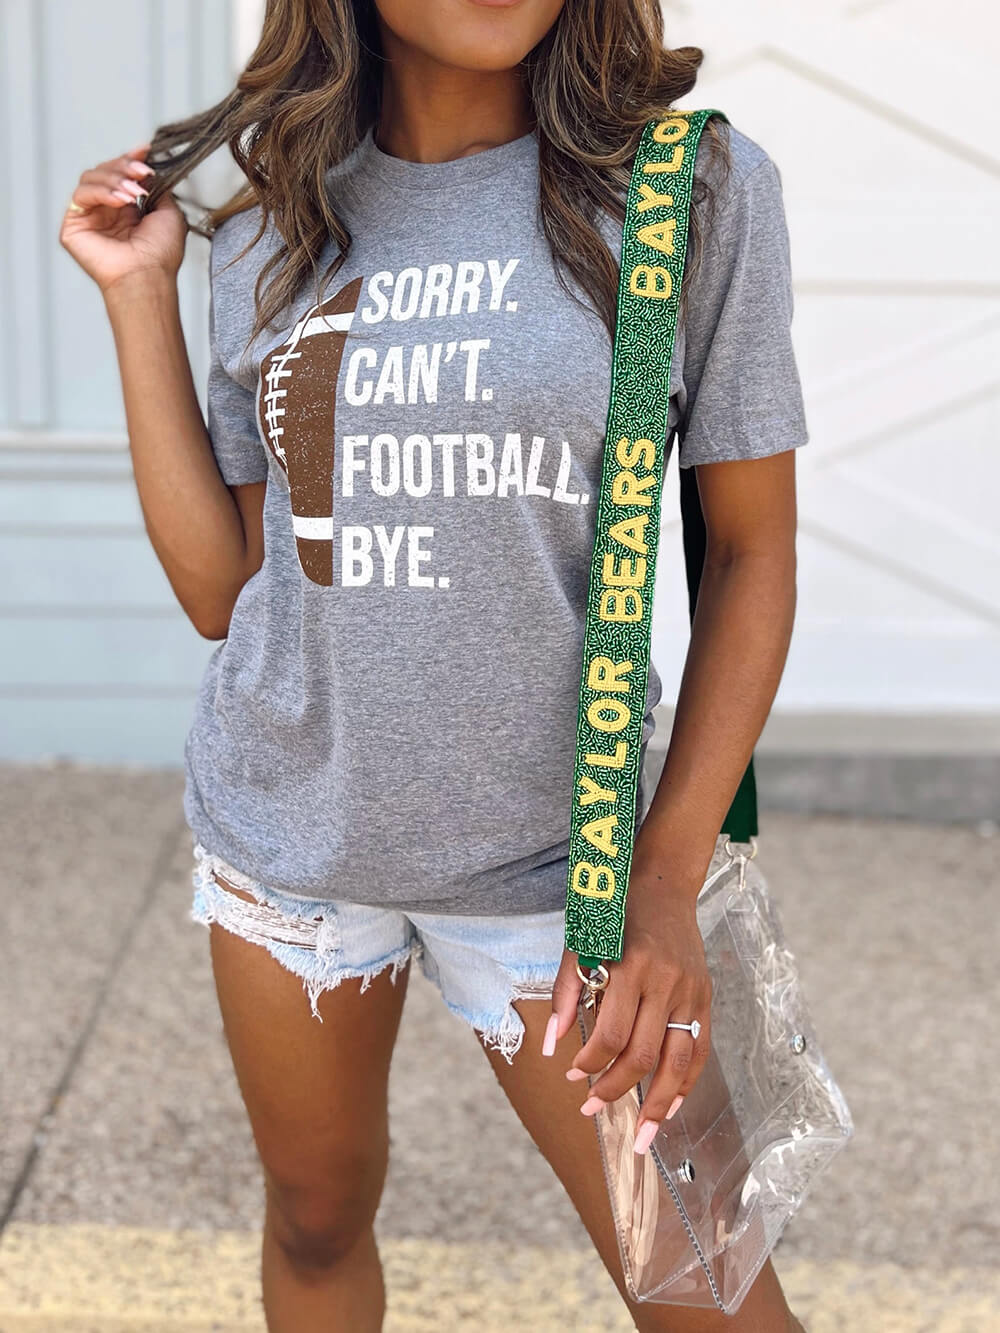 Sorry. Can’T. Football. Bye. Unisex Comfy Tee